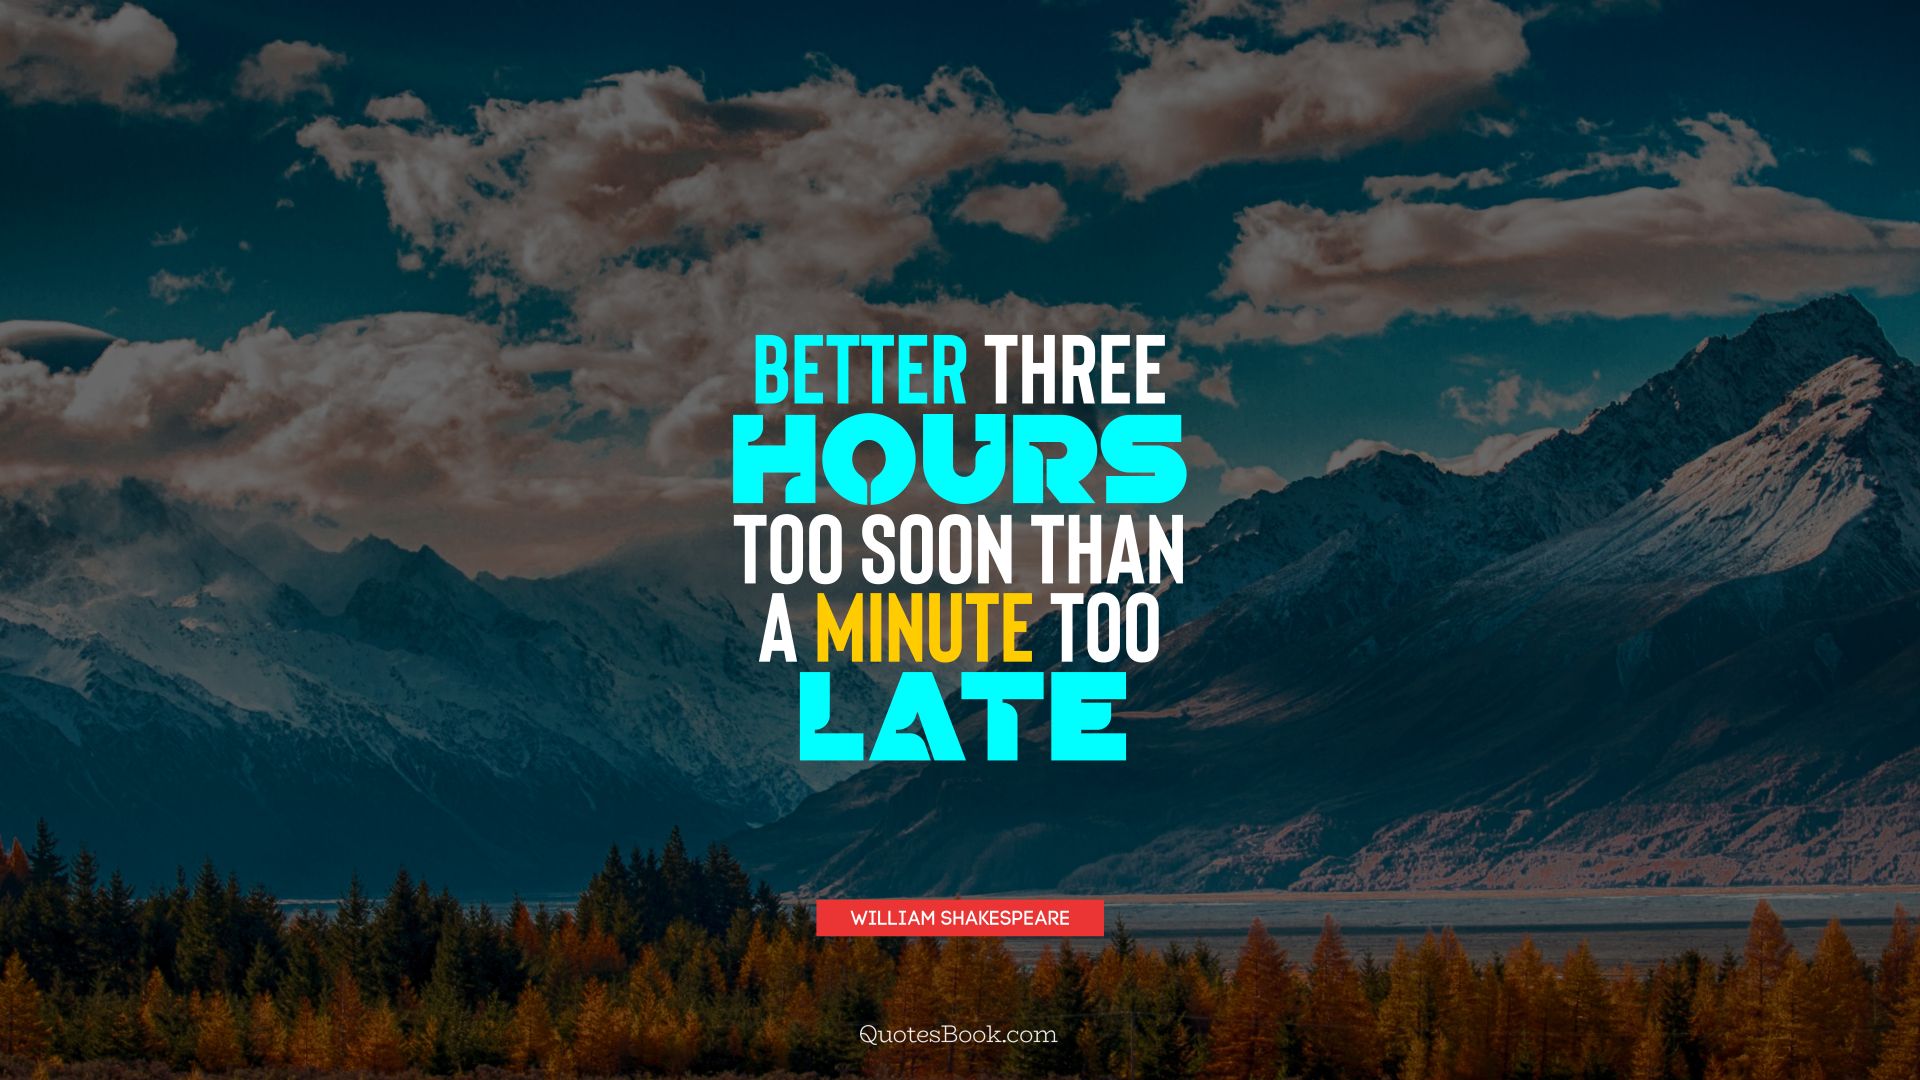 Better three hours too soon than a minute too late. - Quote by William Shakespeare